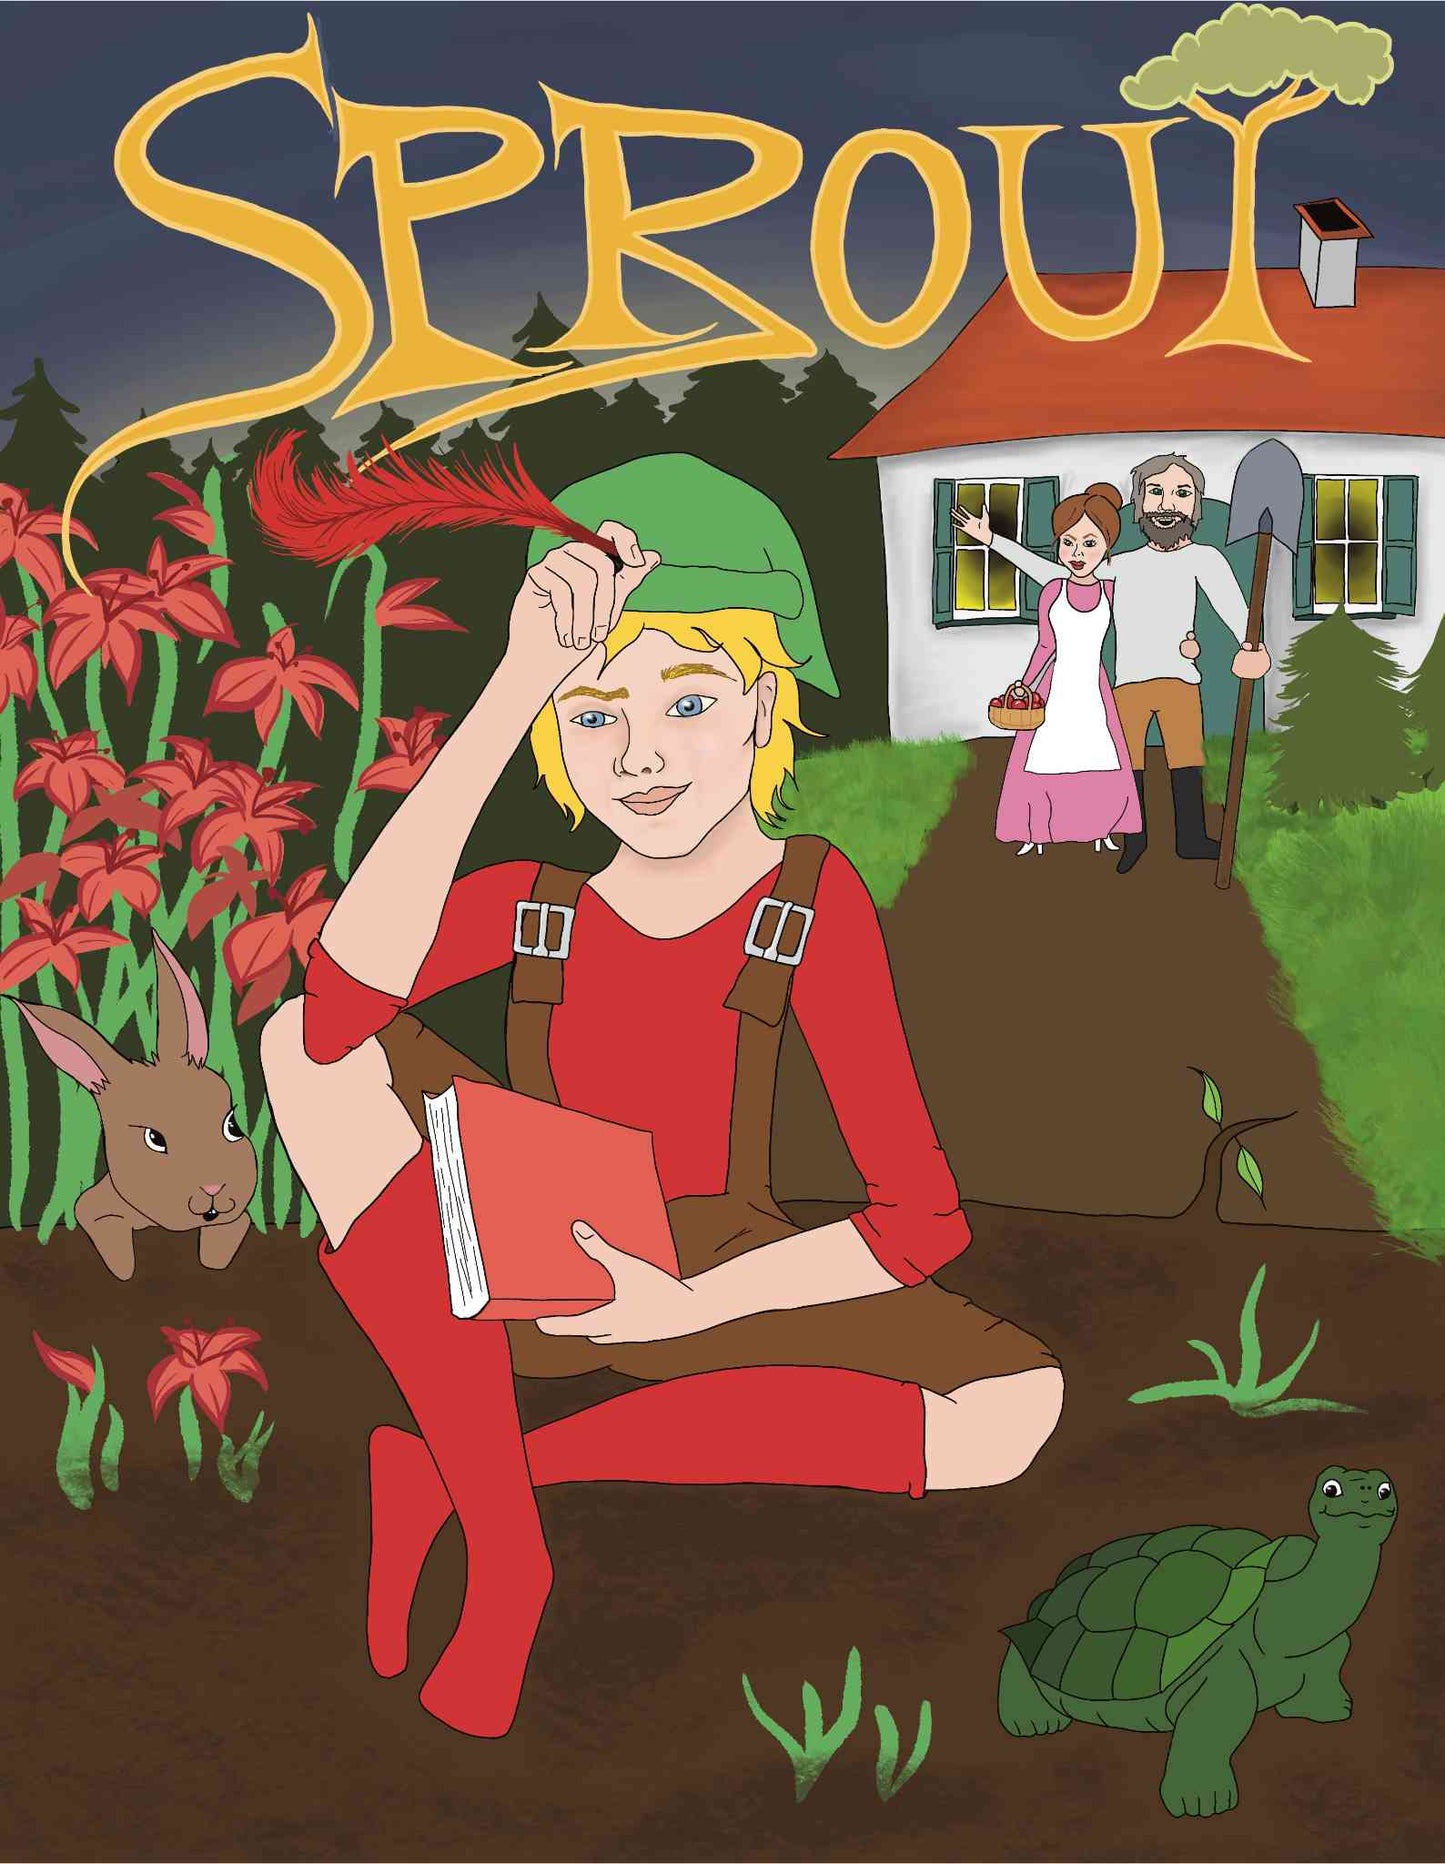 The Story of Sprout - the best children's book with life lessons